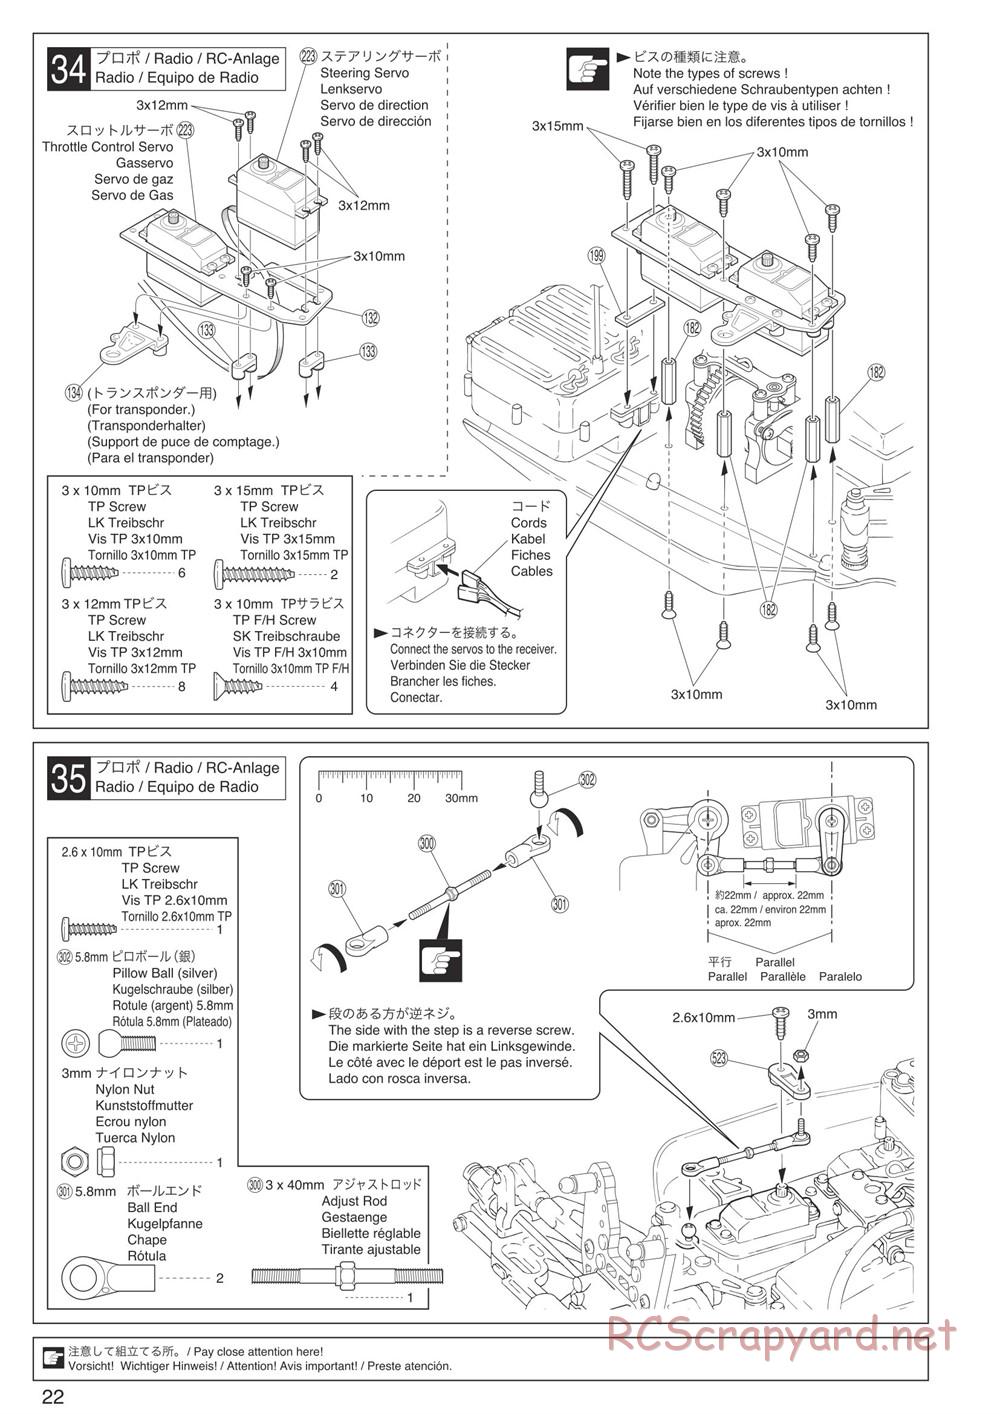 Kyosho - Inferno Neo 3.0 - Manual - Page 22